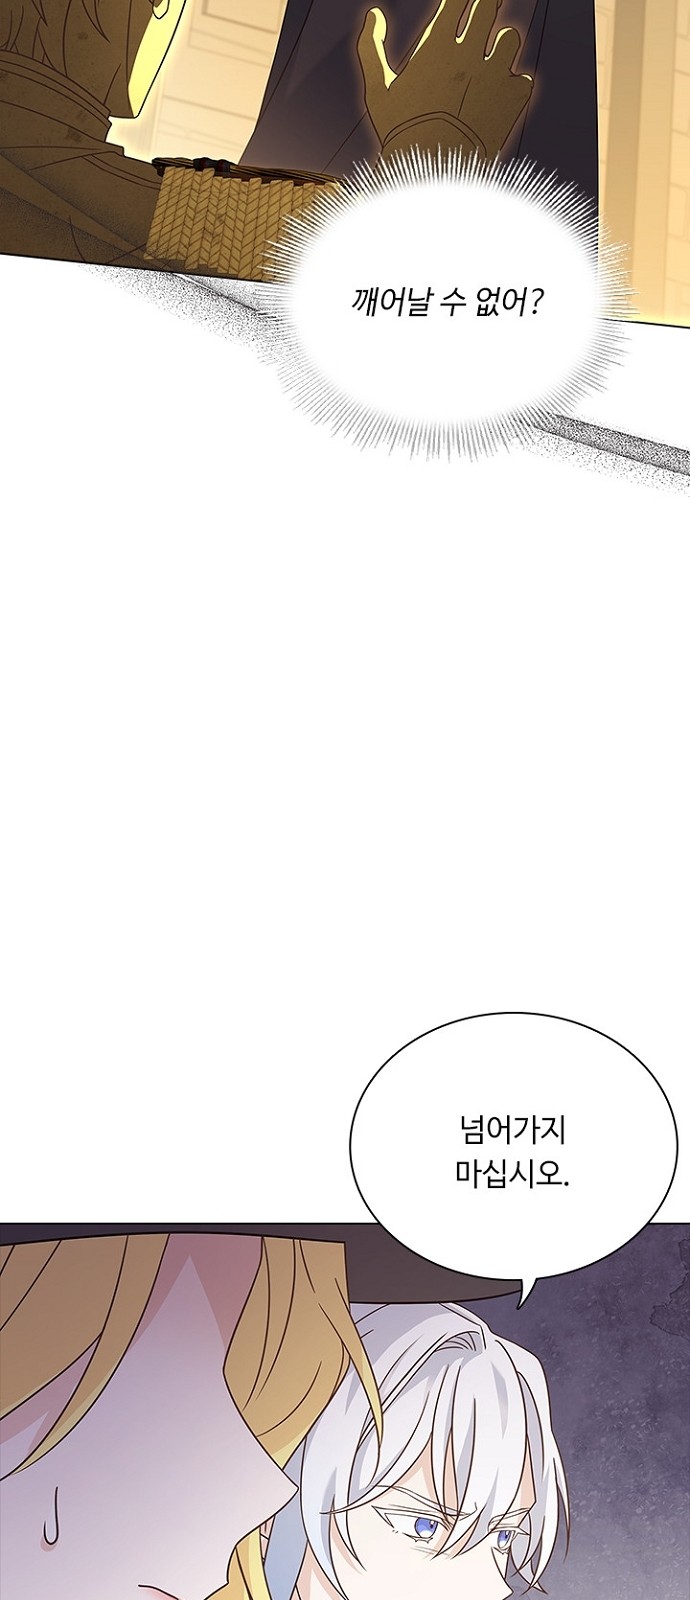 His Majesty's Proposal (A Night With the Emperor) - Chapter 93 - Page 7